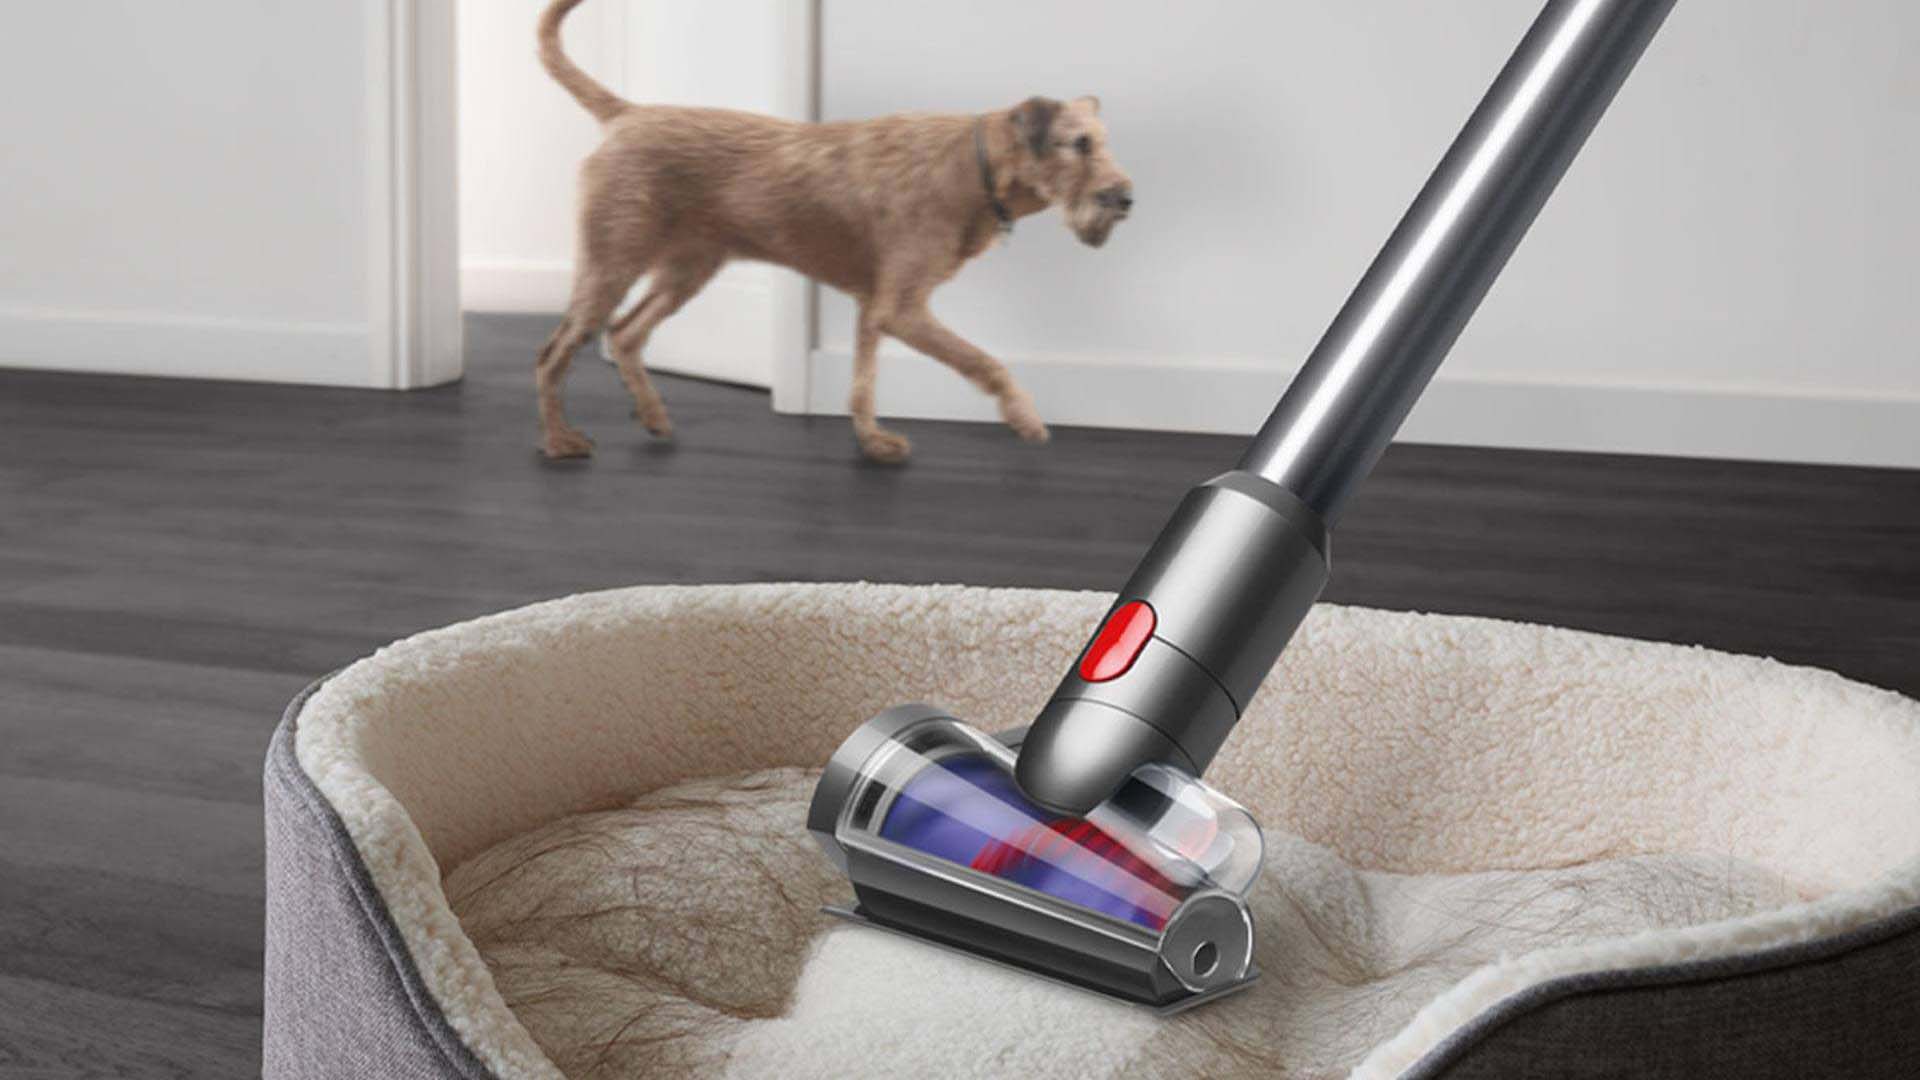 Various attachments are available for Dyson vacuum cleaners to help combat the spread of pet hair